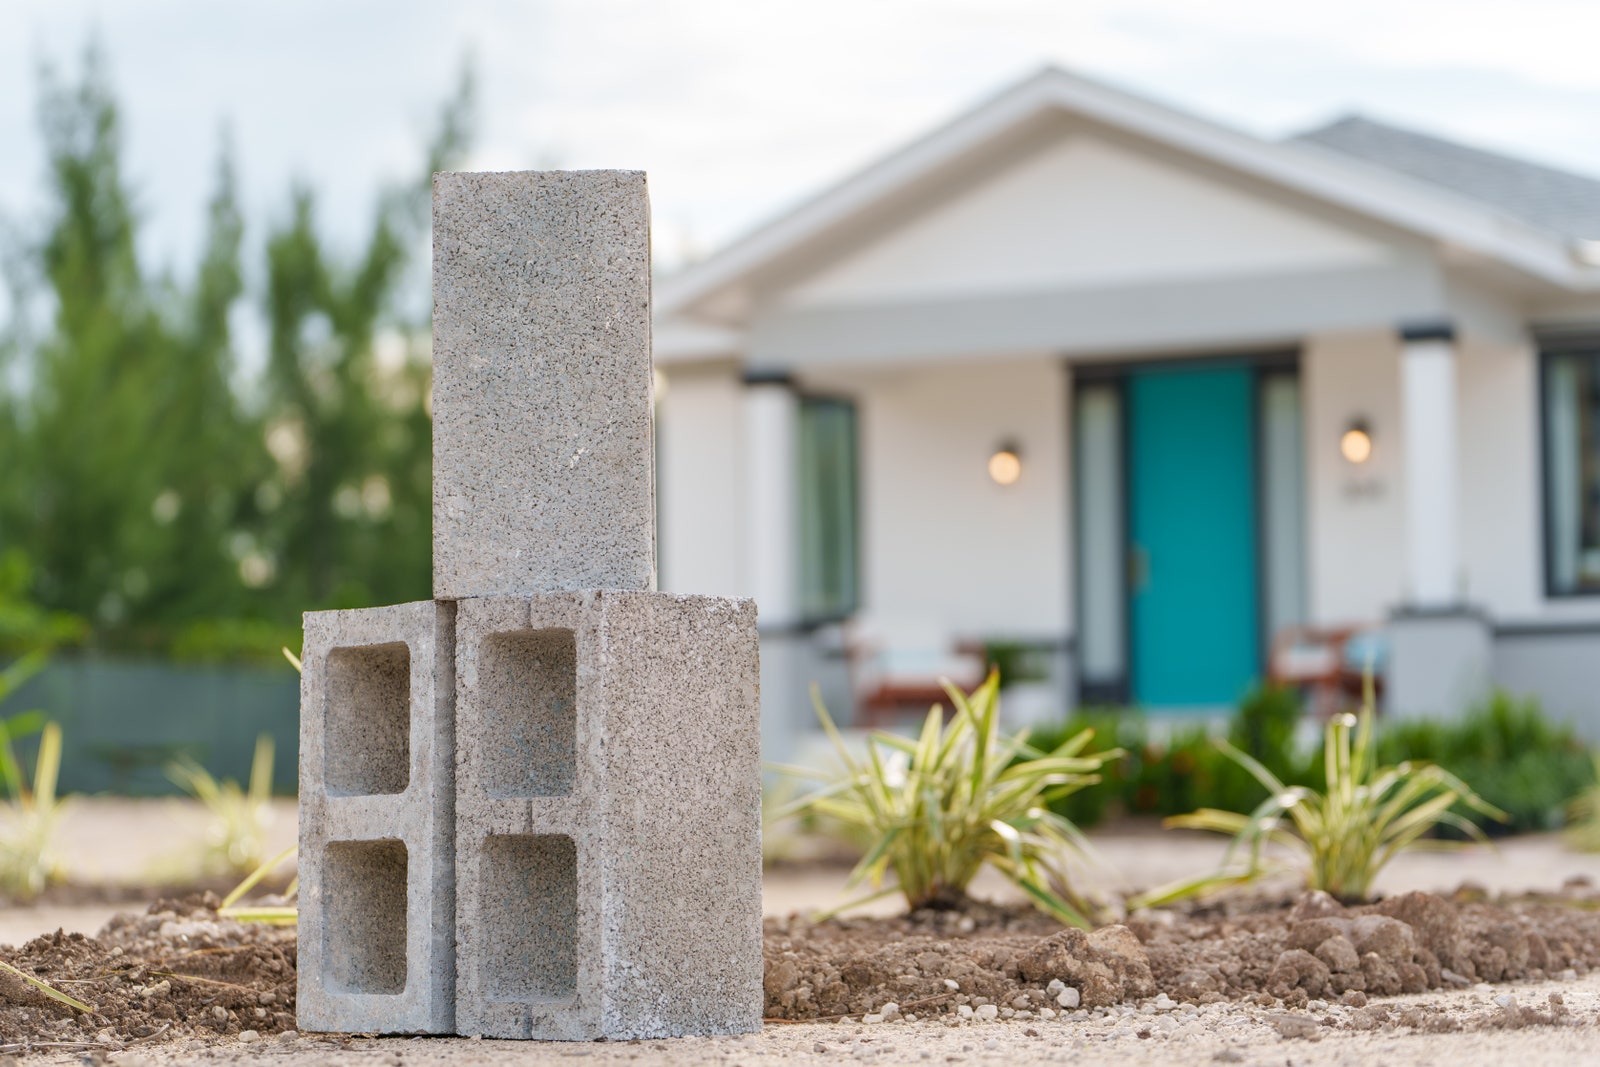 concrete blocks with a home in the foreground